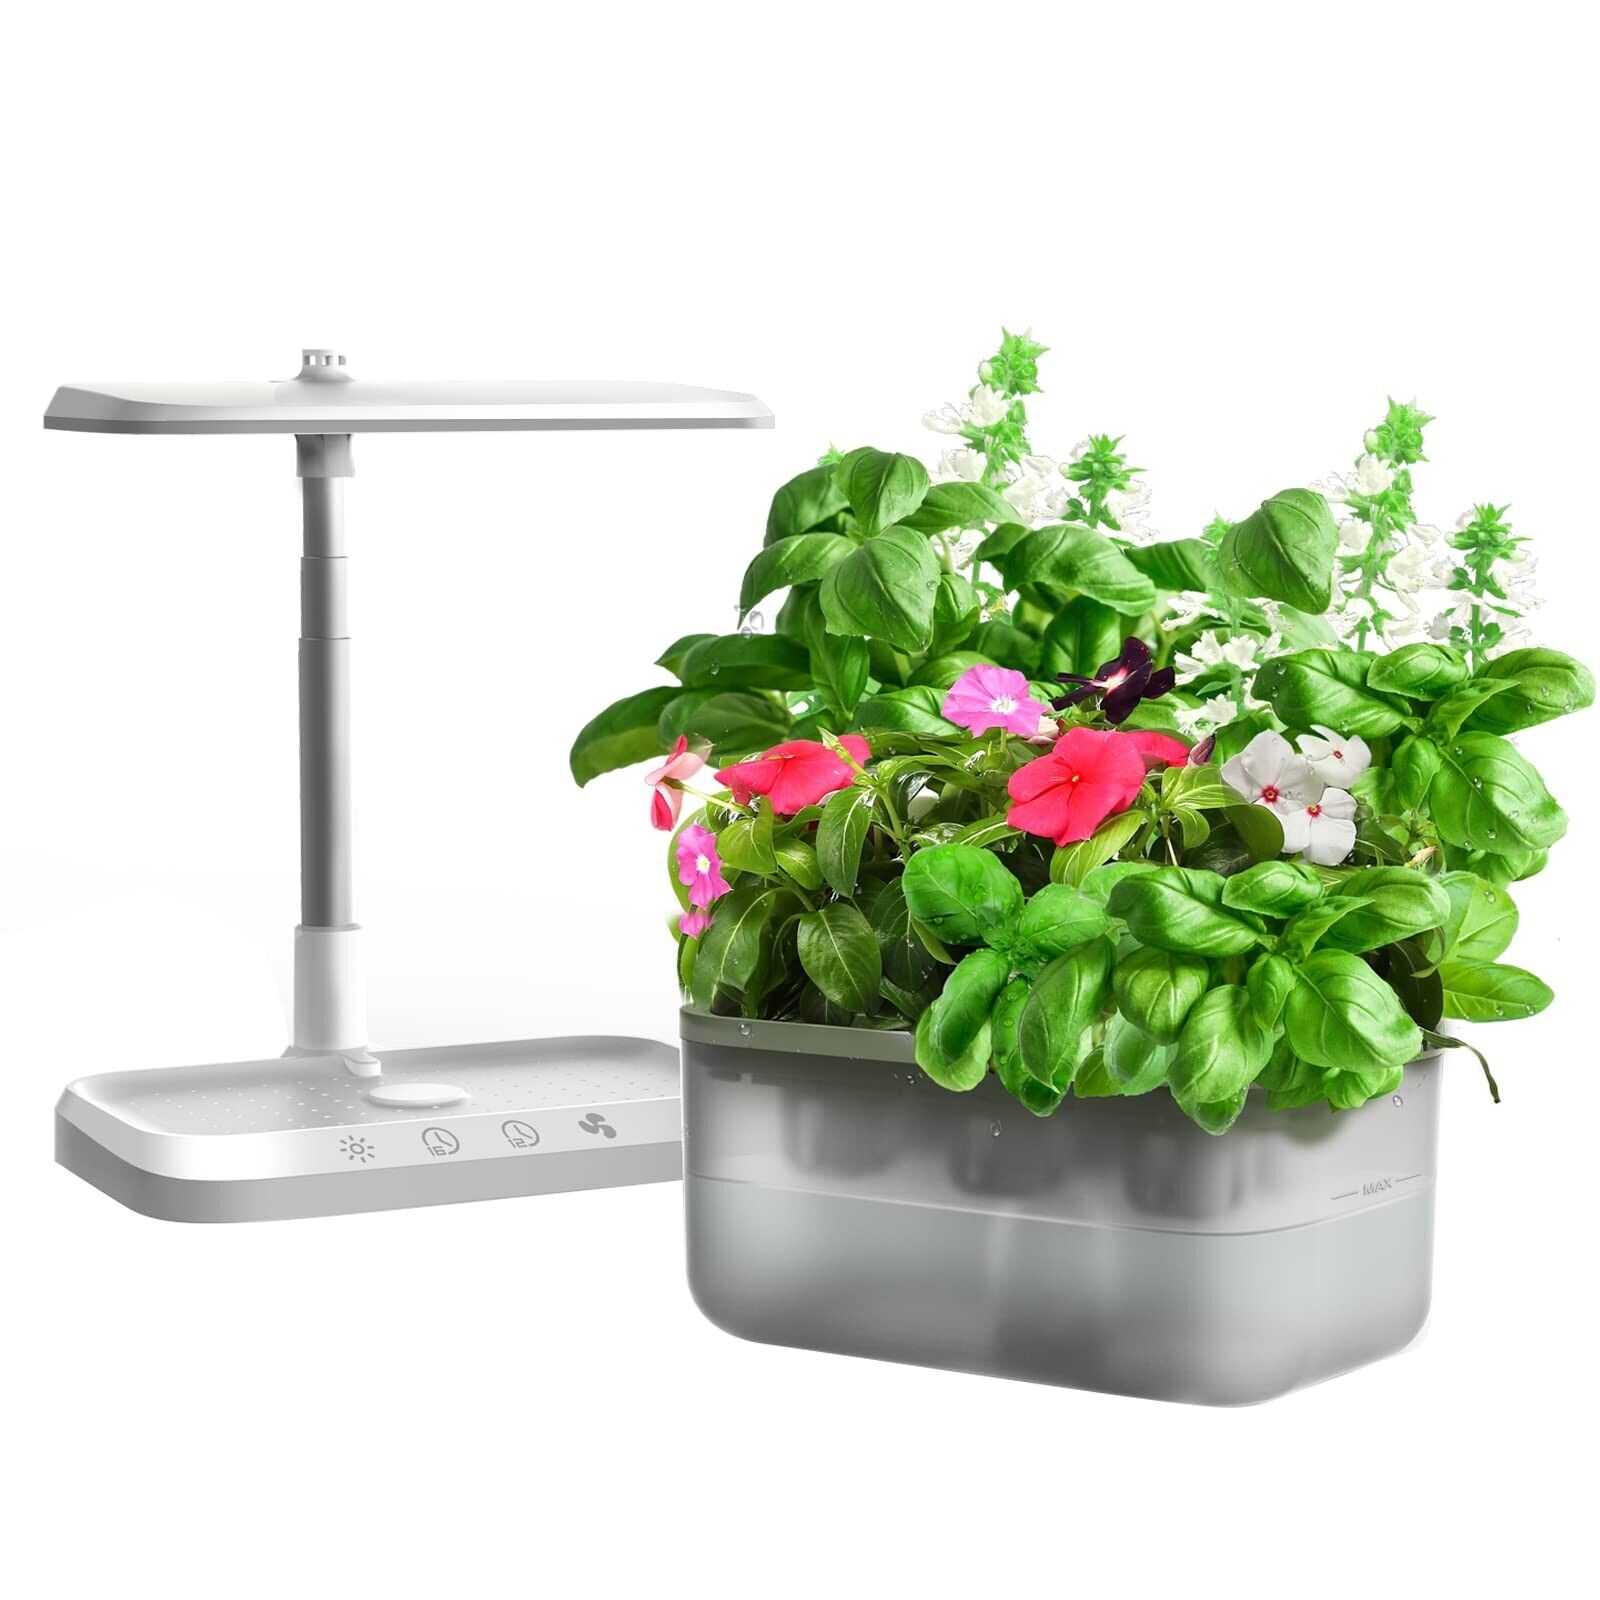 Hydroponics Growing System,Upgrade Wireless 360°Visible Detachable Indoor H